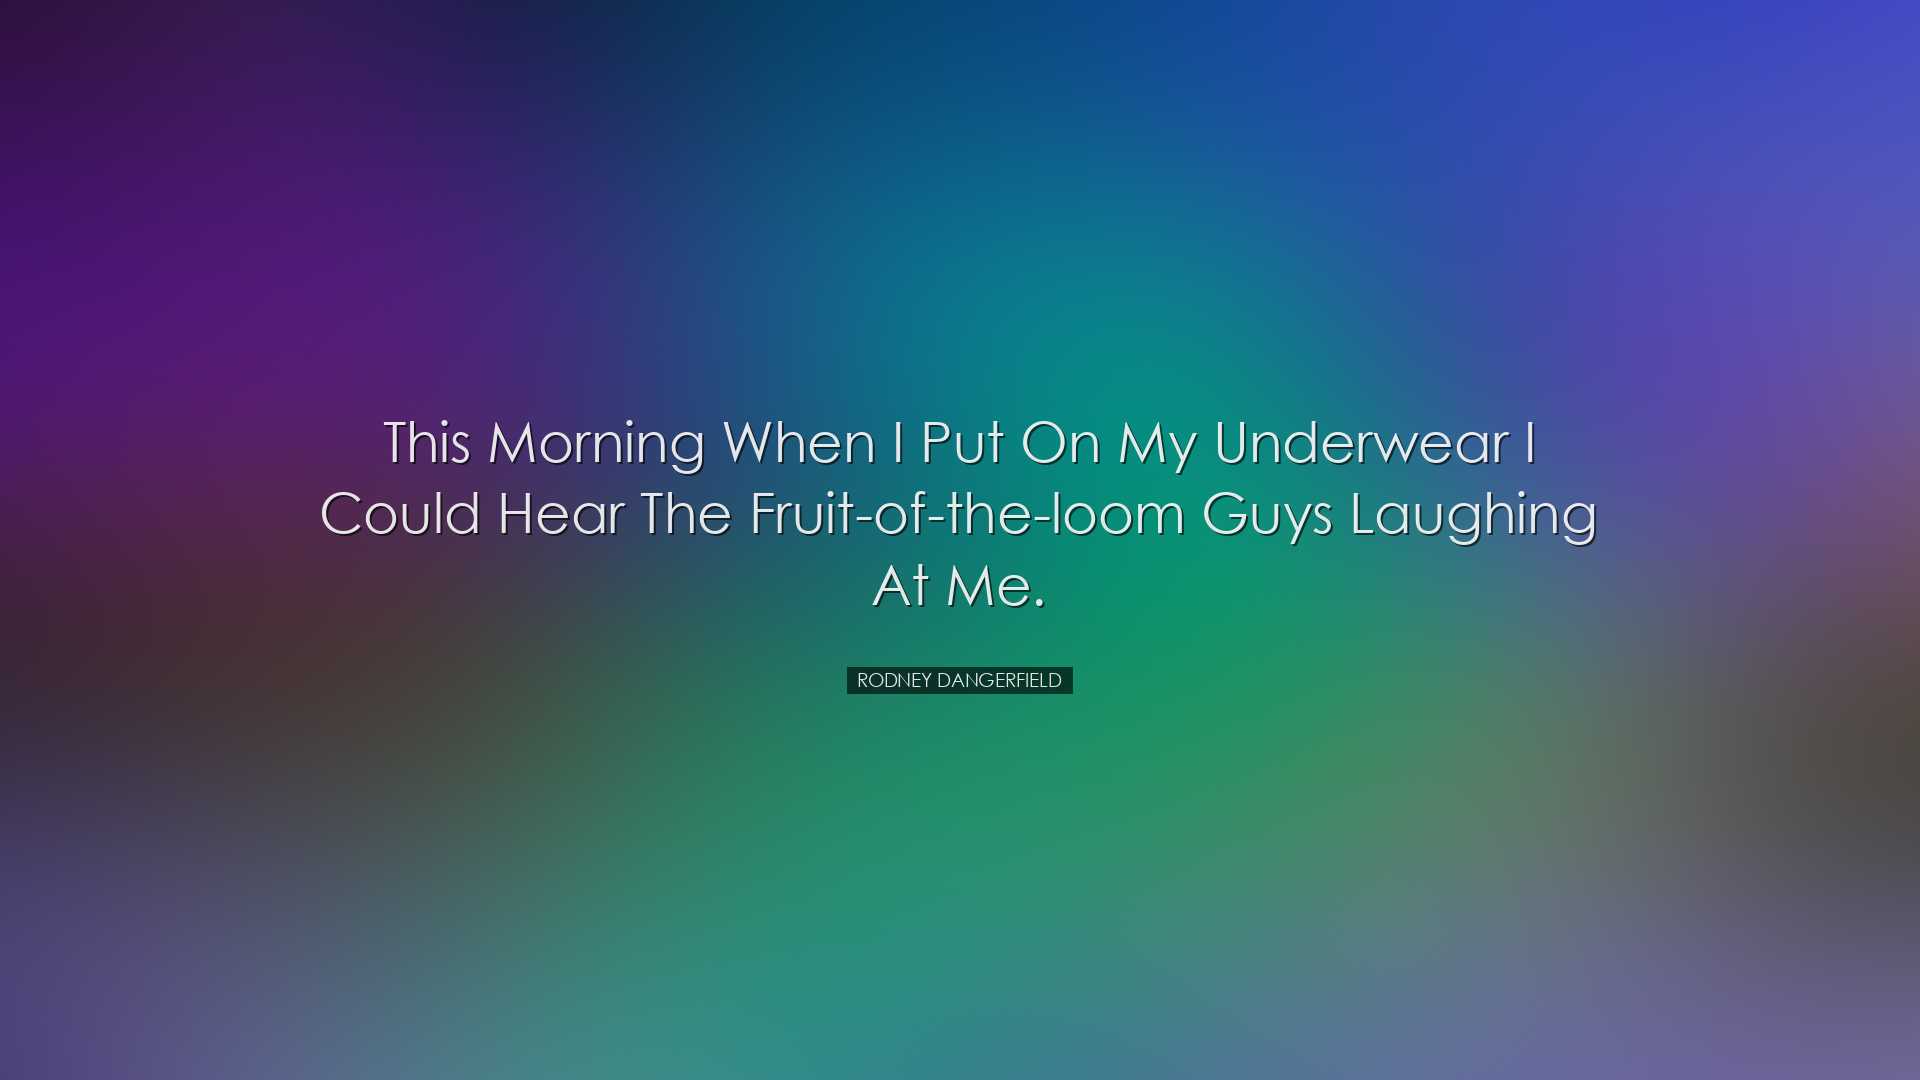 This morning when I put on my underwear I could hear the fruit-of-